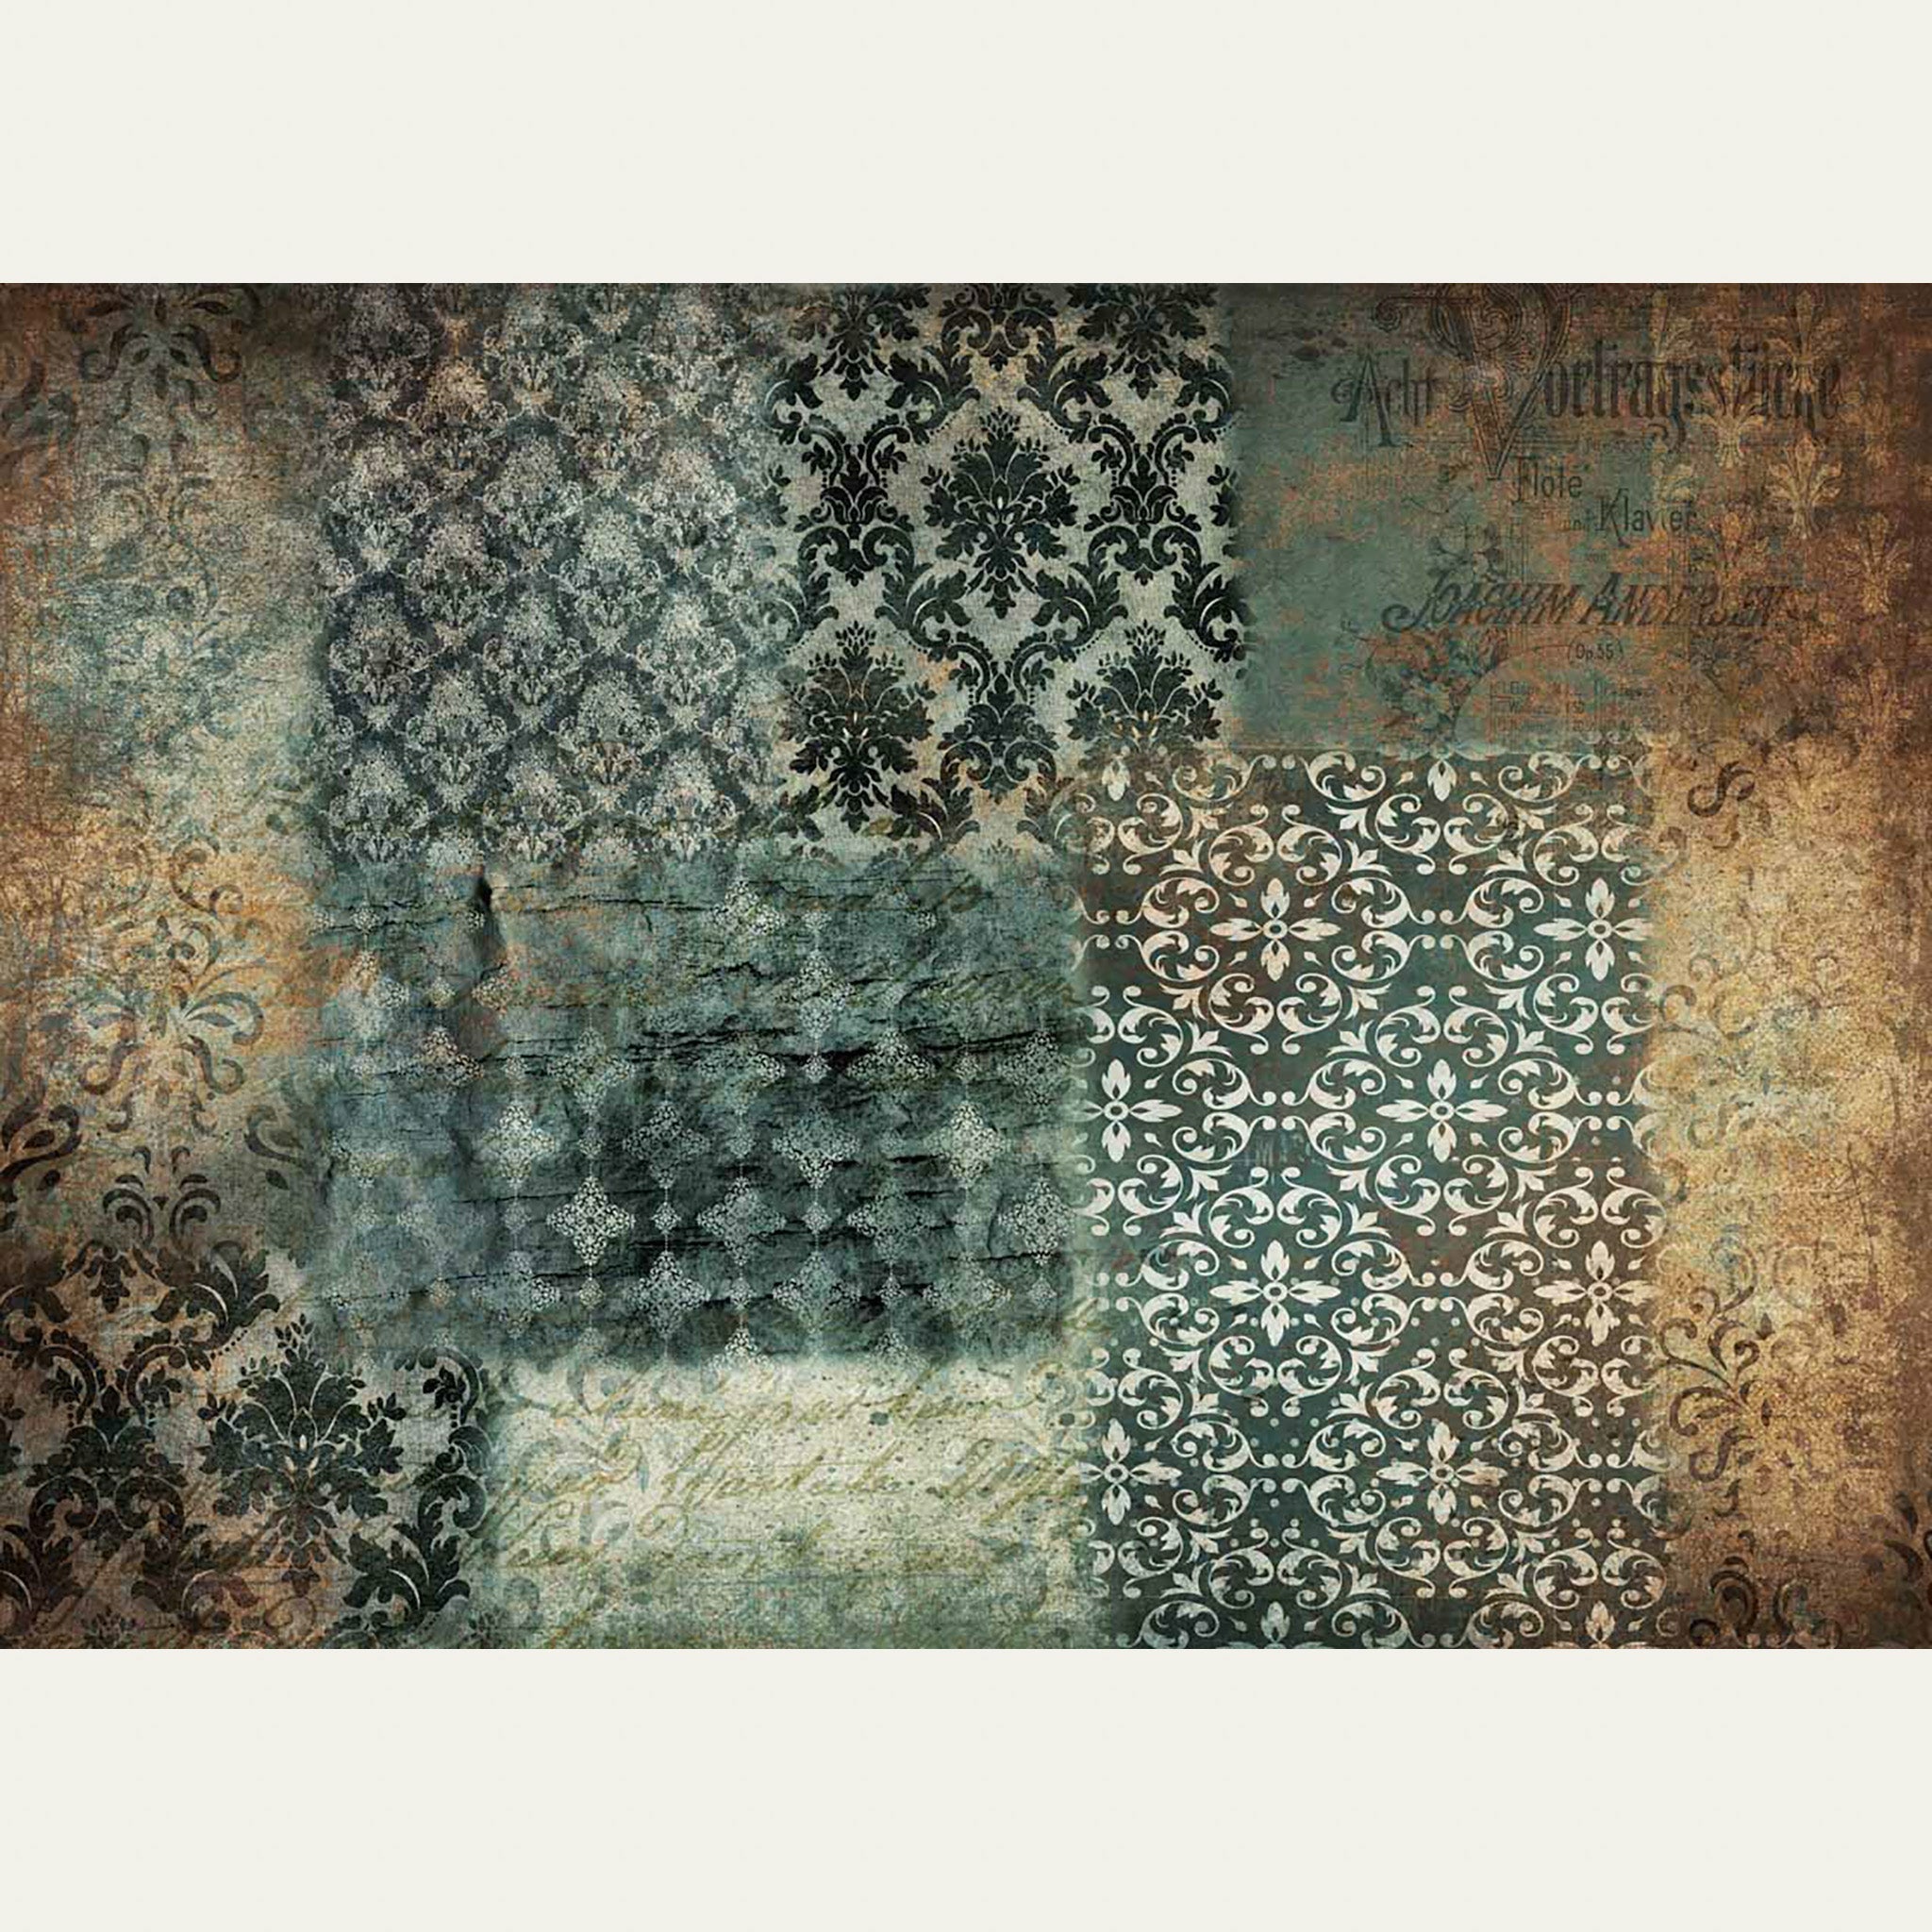 A1 rice paper design that features a beautiful collage of damask designs in rich tones of patina, rust, and sepia. White borders are on the top and bottom.